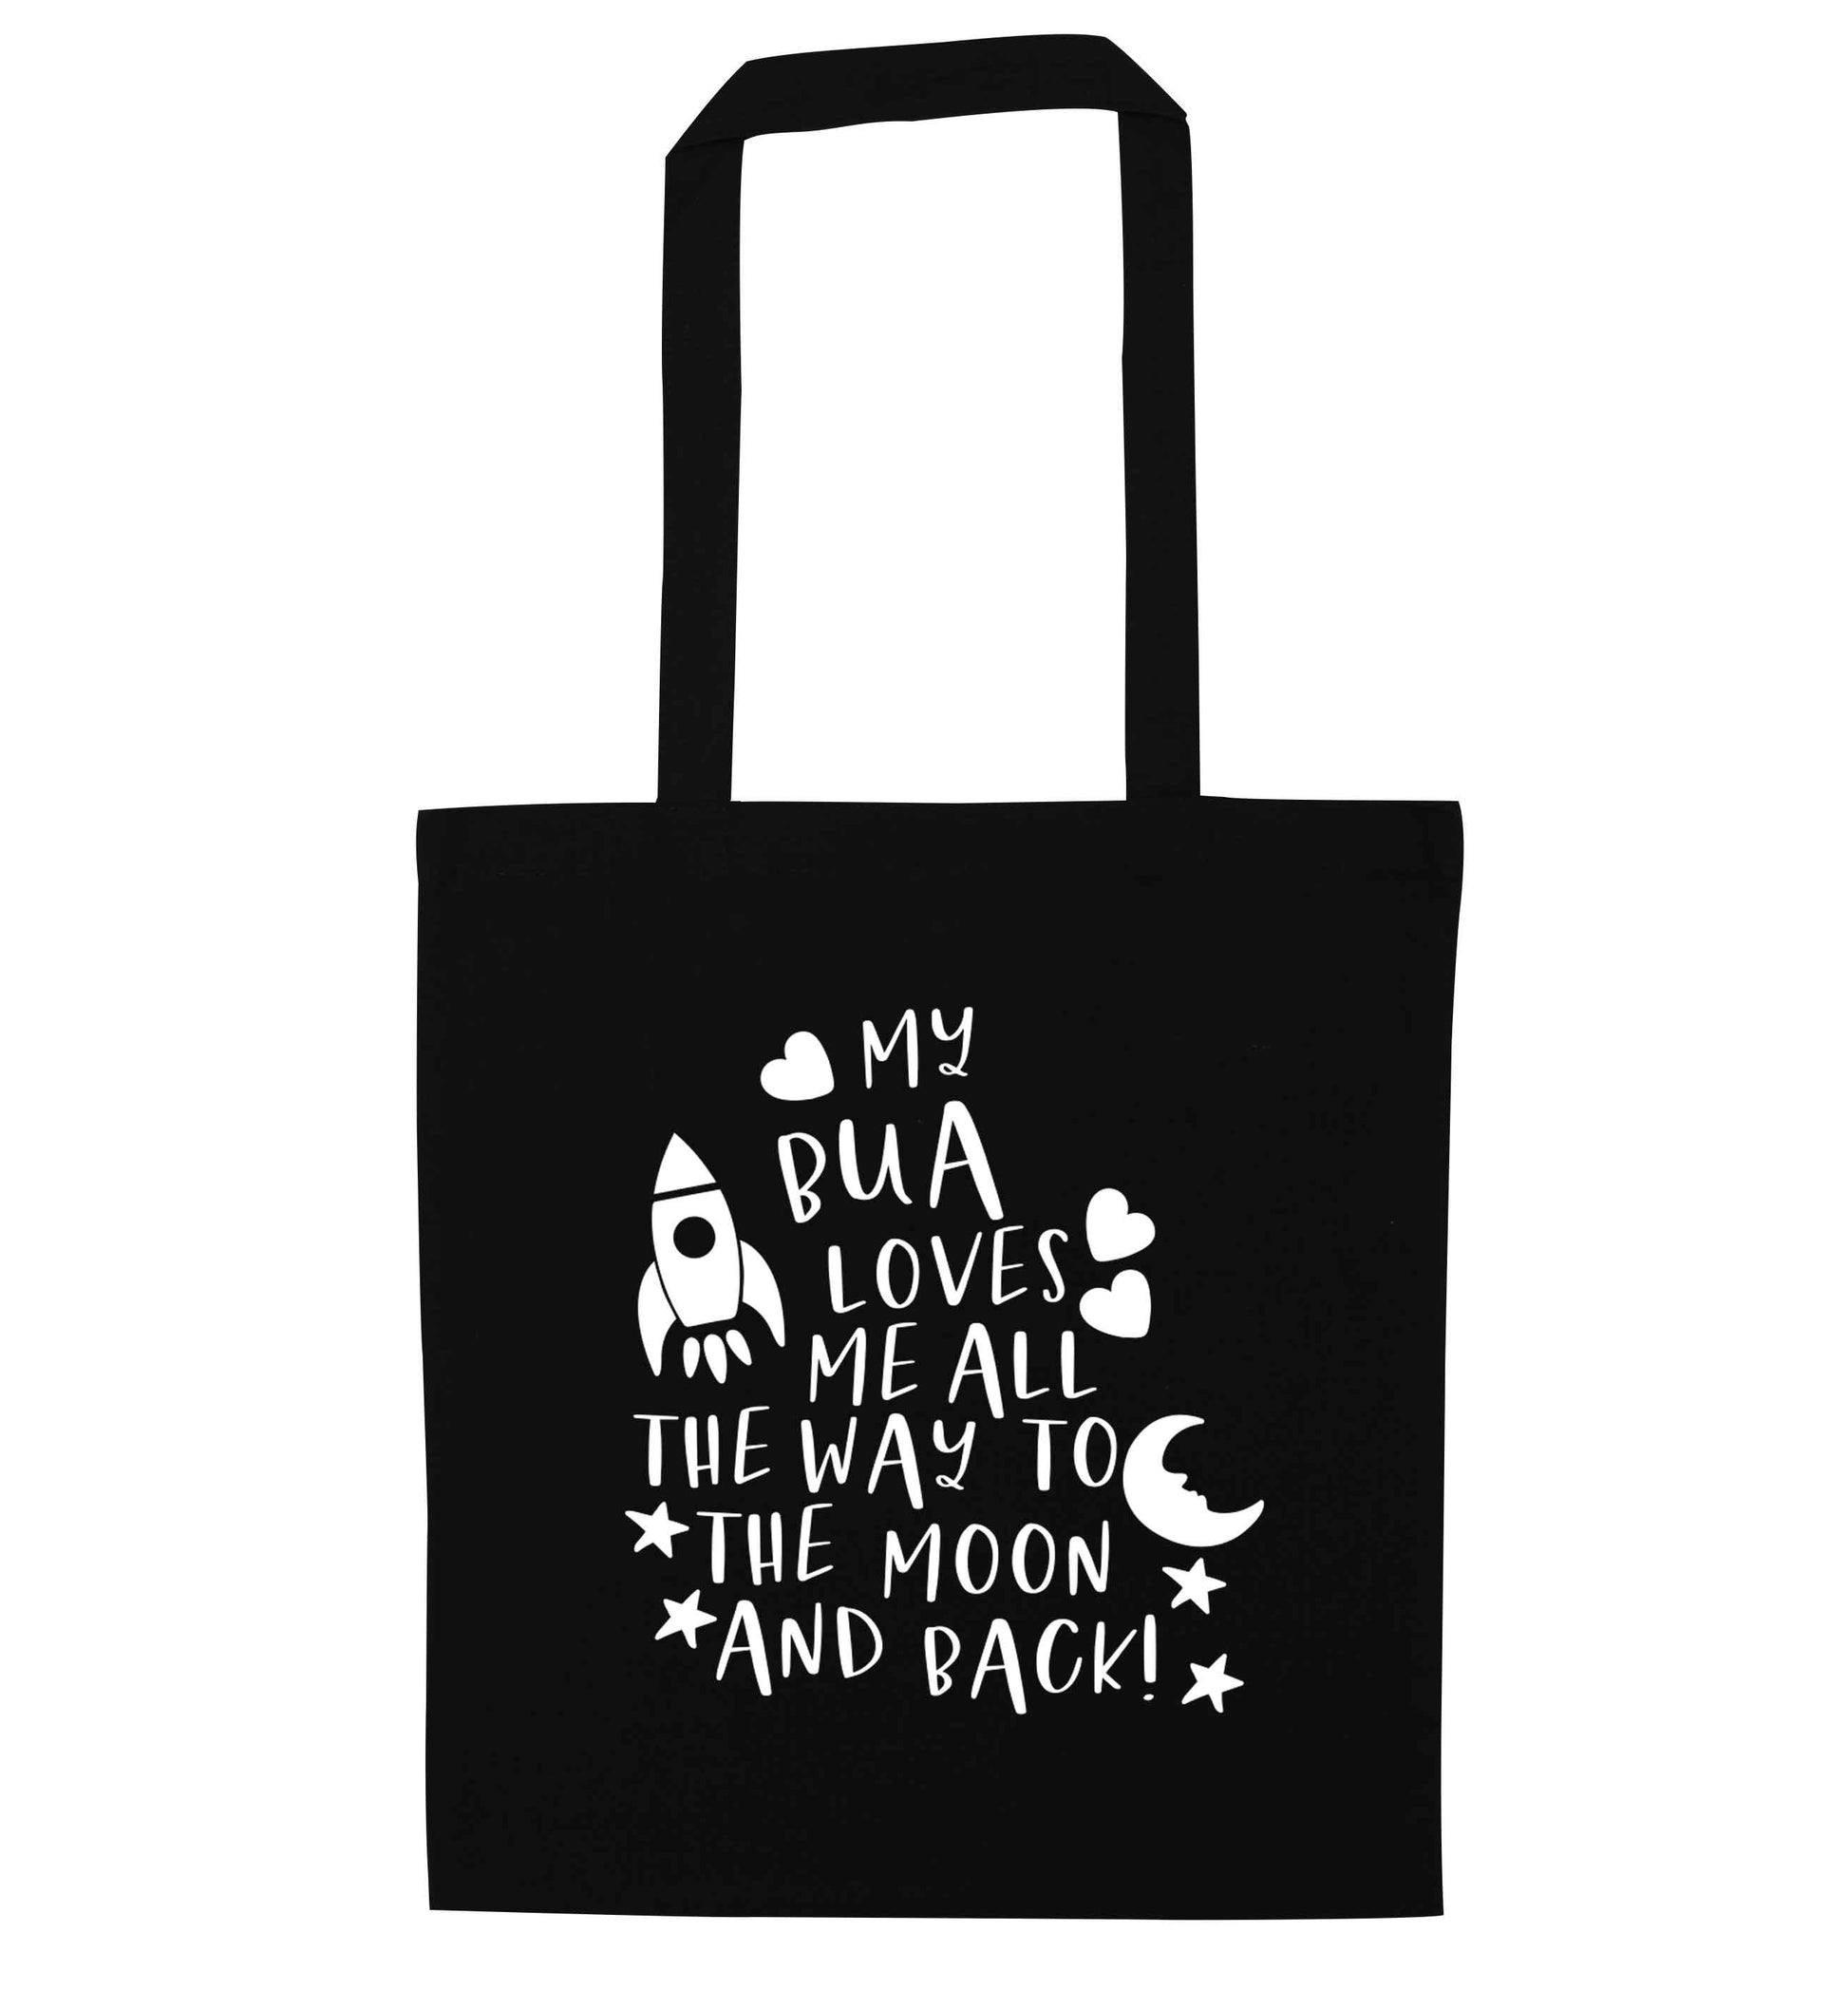 My bua loves me all they way to the moon and back black tote bag